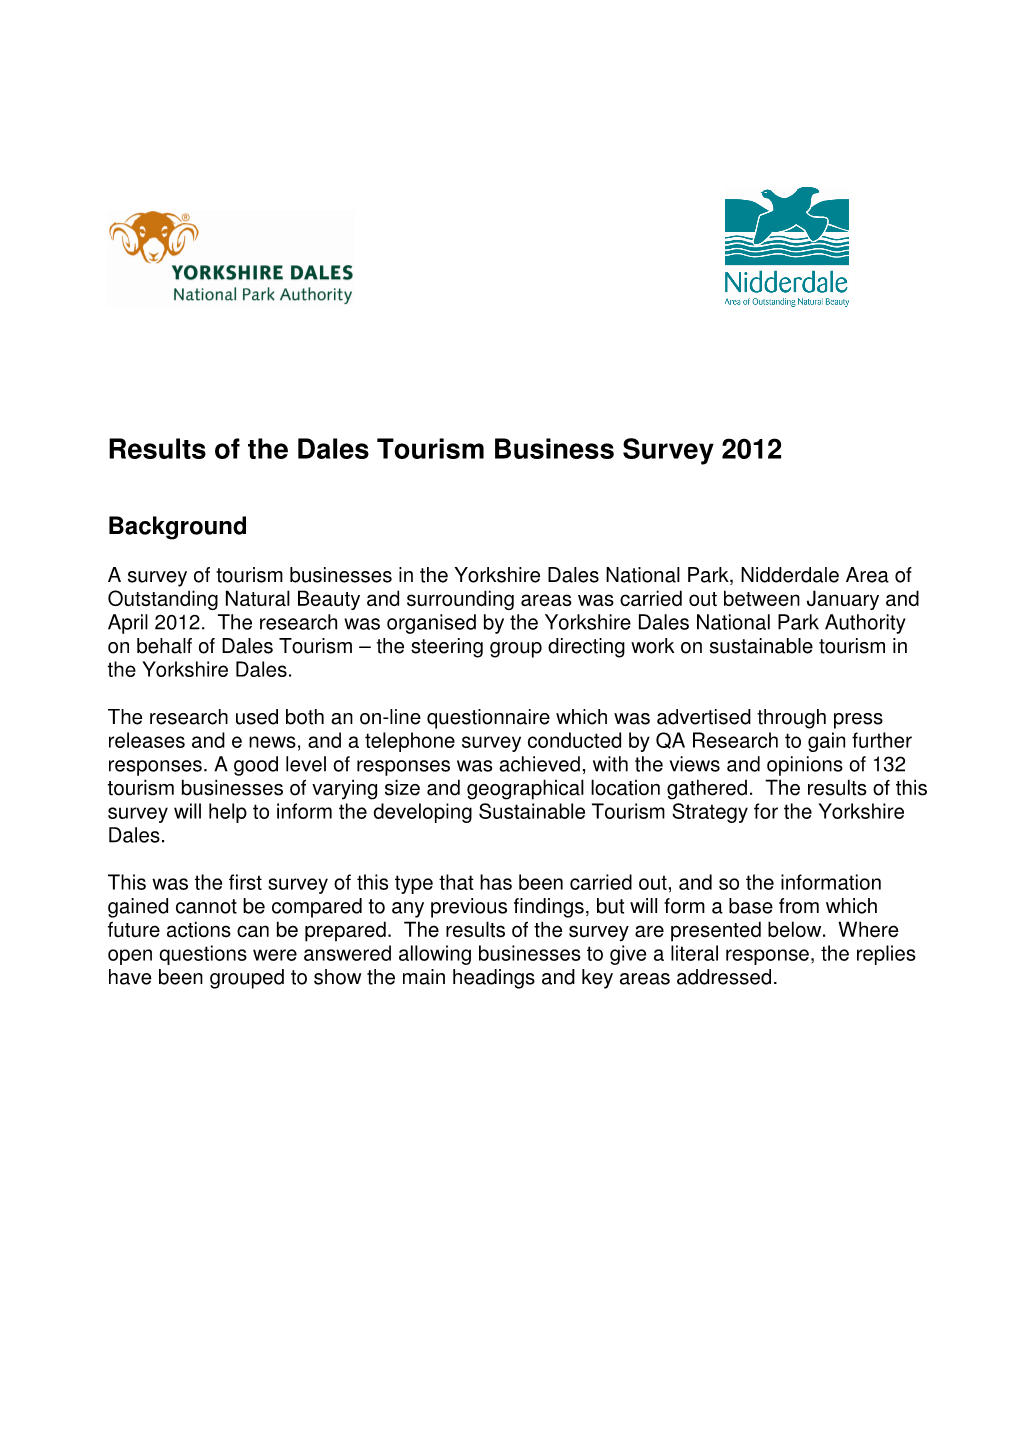 Results of the Dales Tourism Business Survey 2012